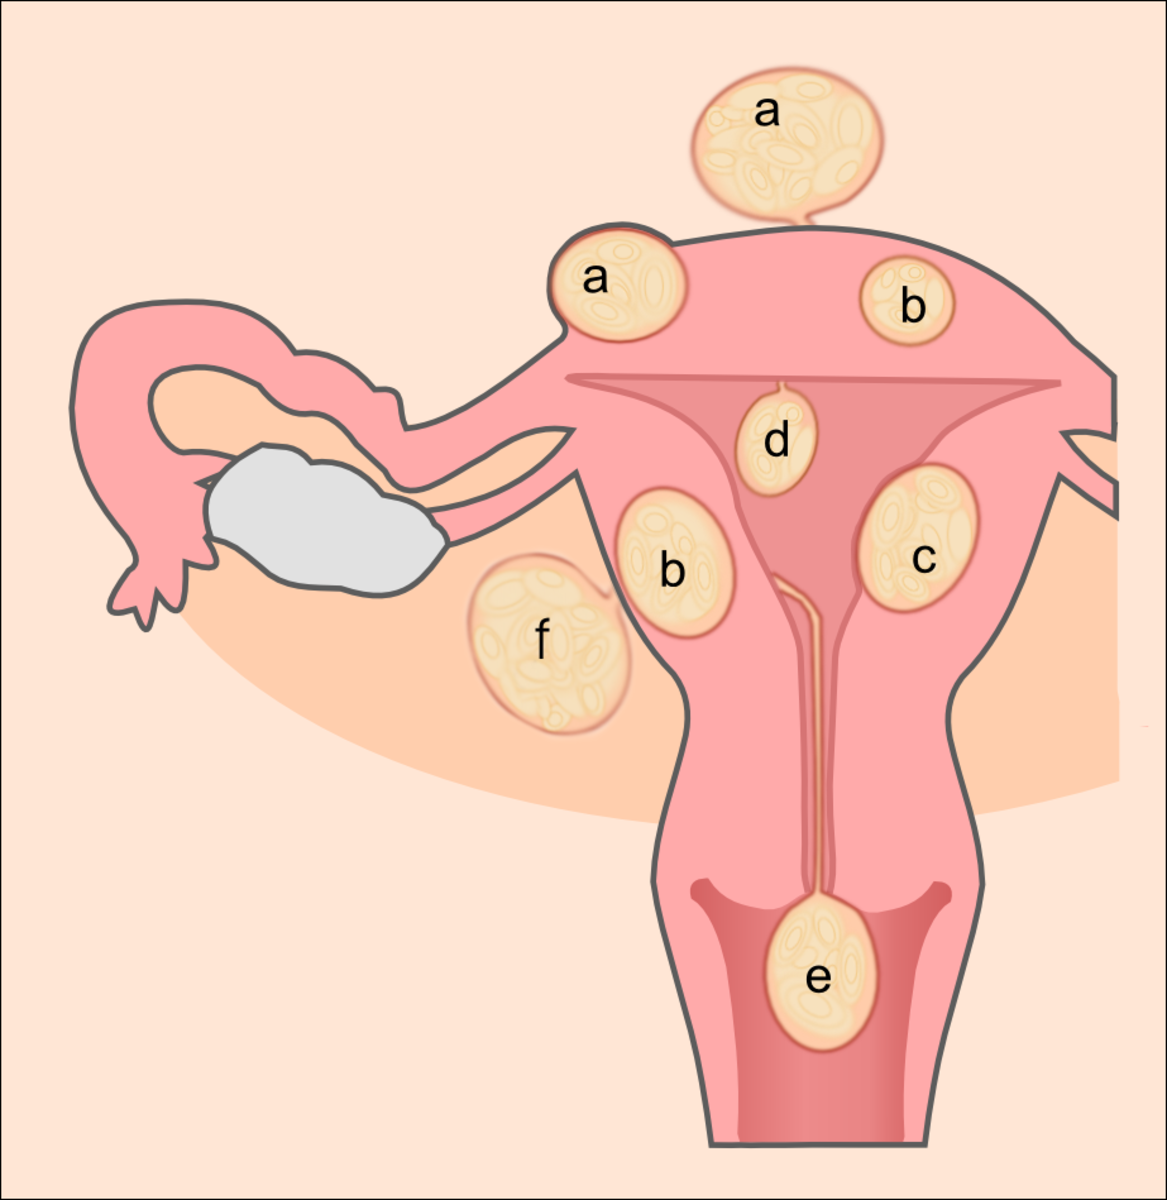 Schematic showing the placement of six types of uterine fibroids within the womb